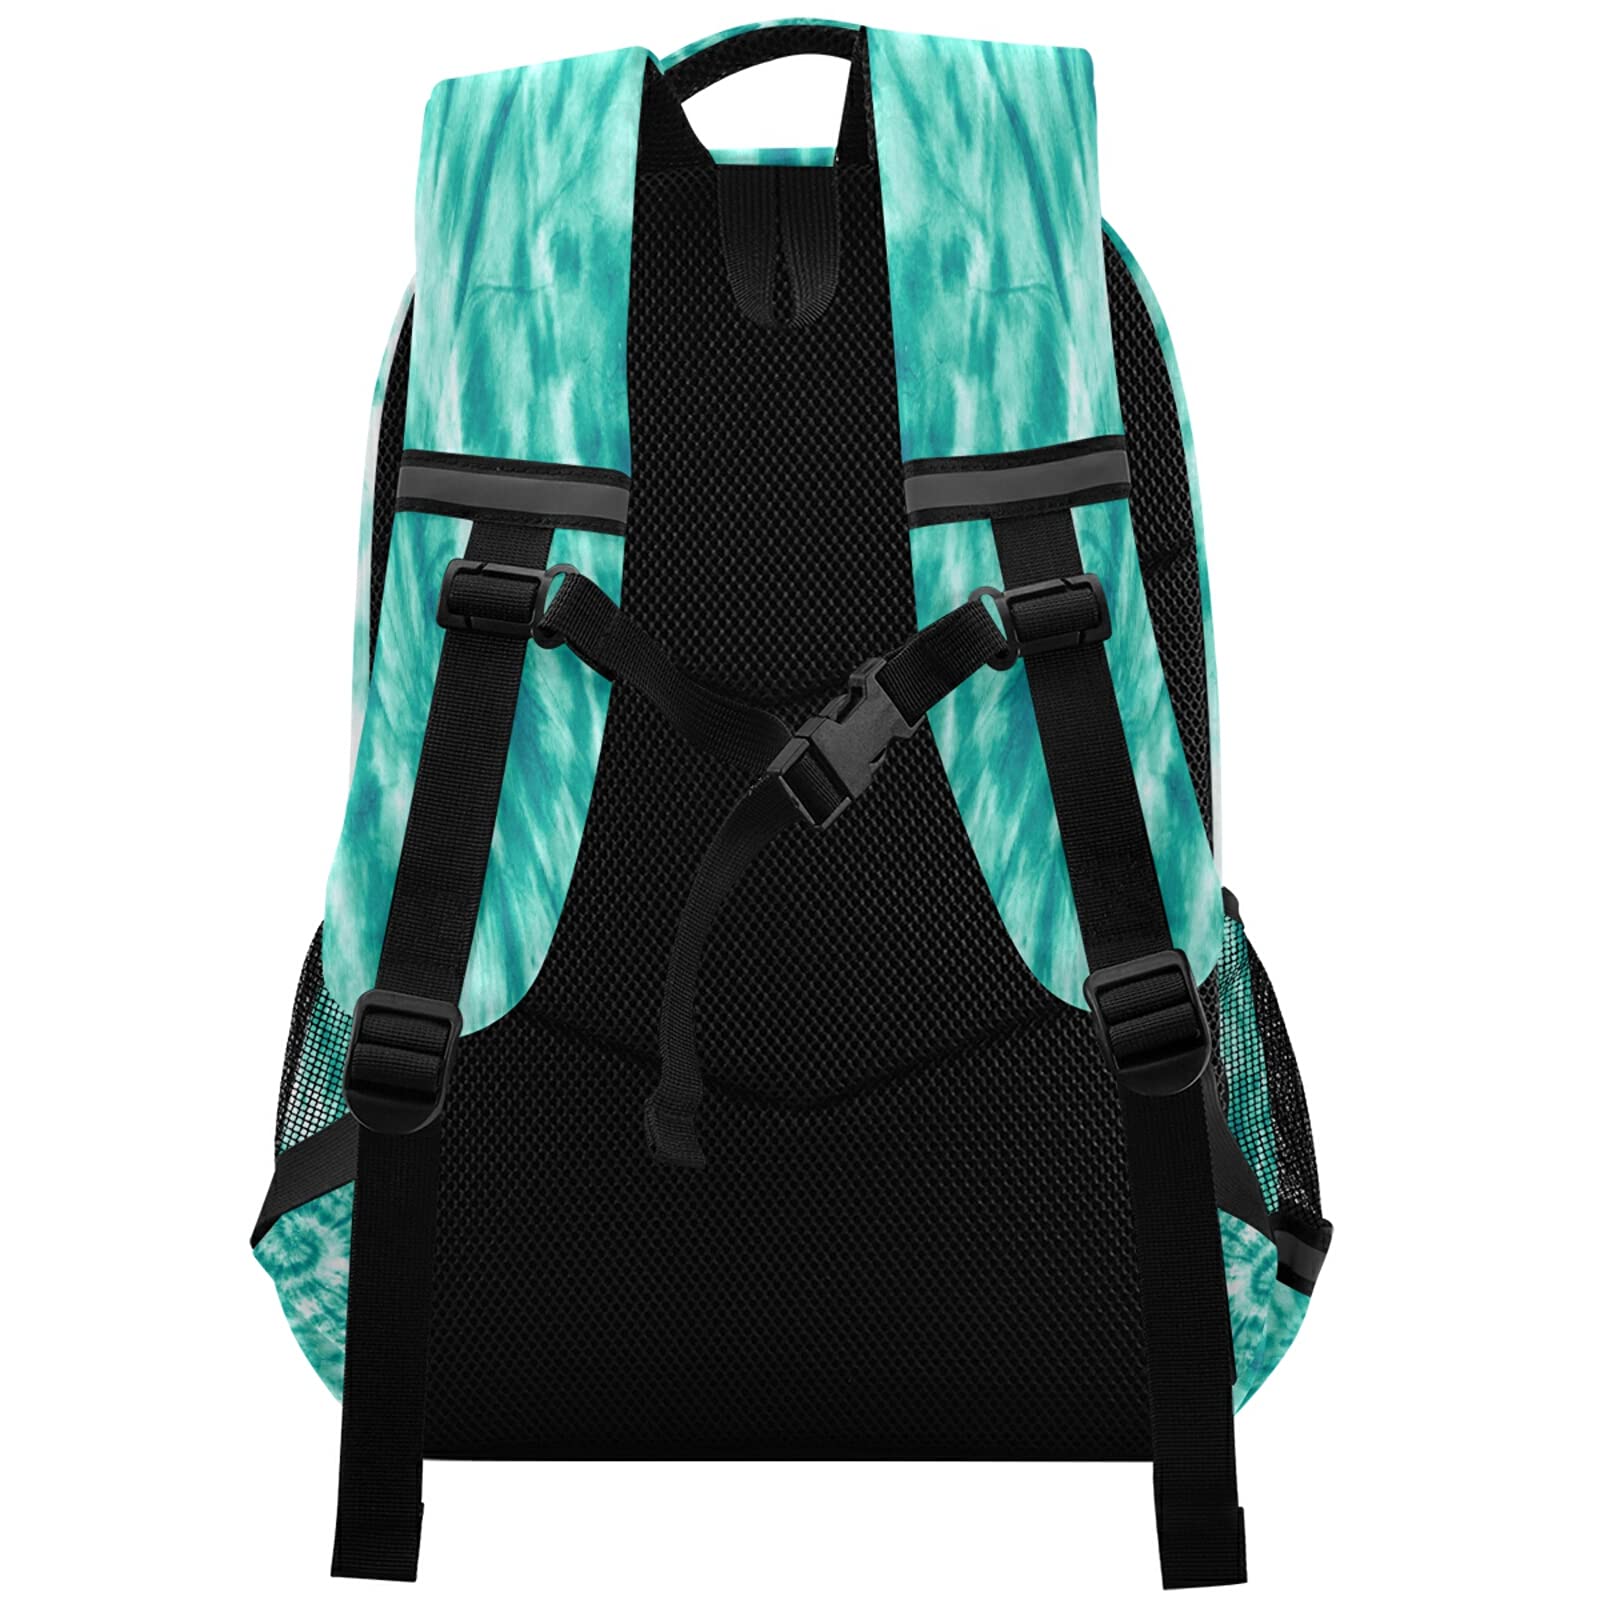 ALAZA Teal Turquoise Tie Dye Backpacks Travel Laptop Daypack School Book Bag for Men Women Teens Kids… one-size